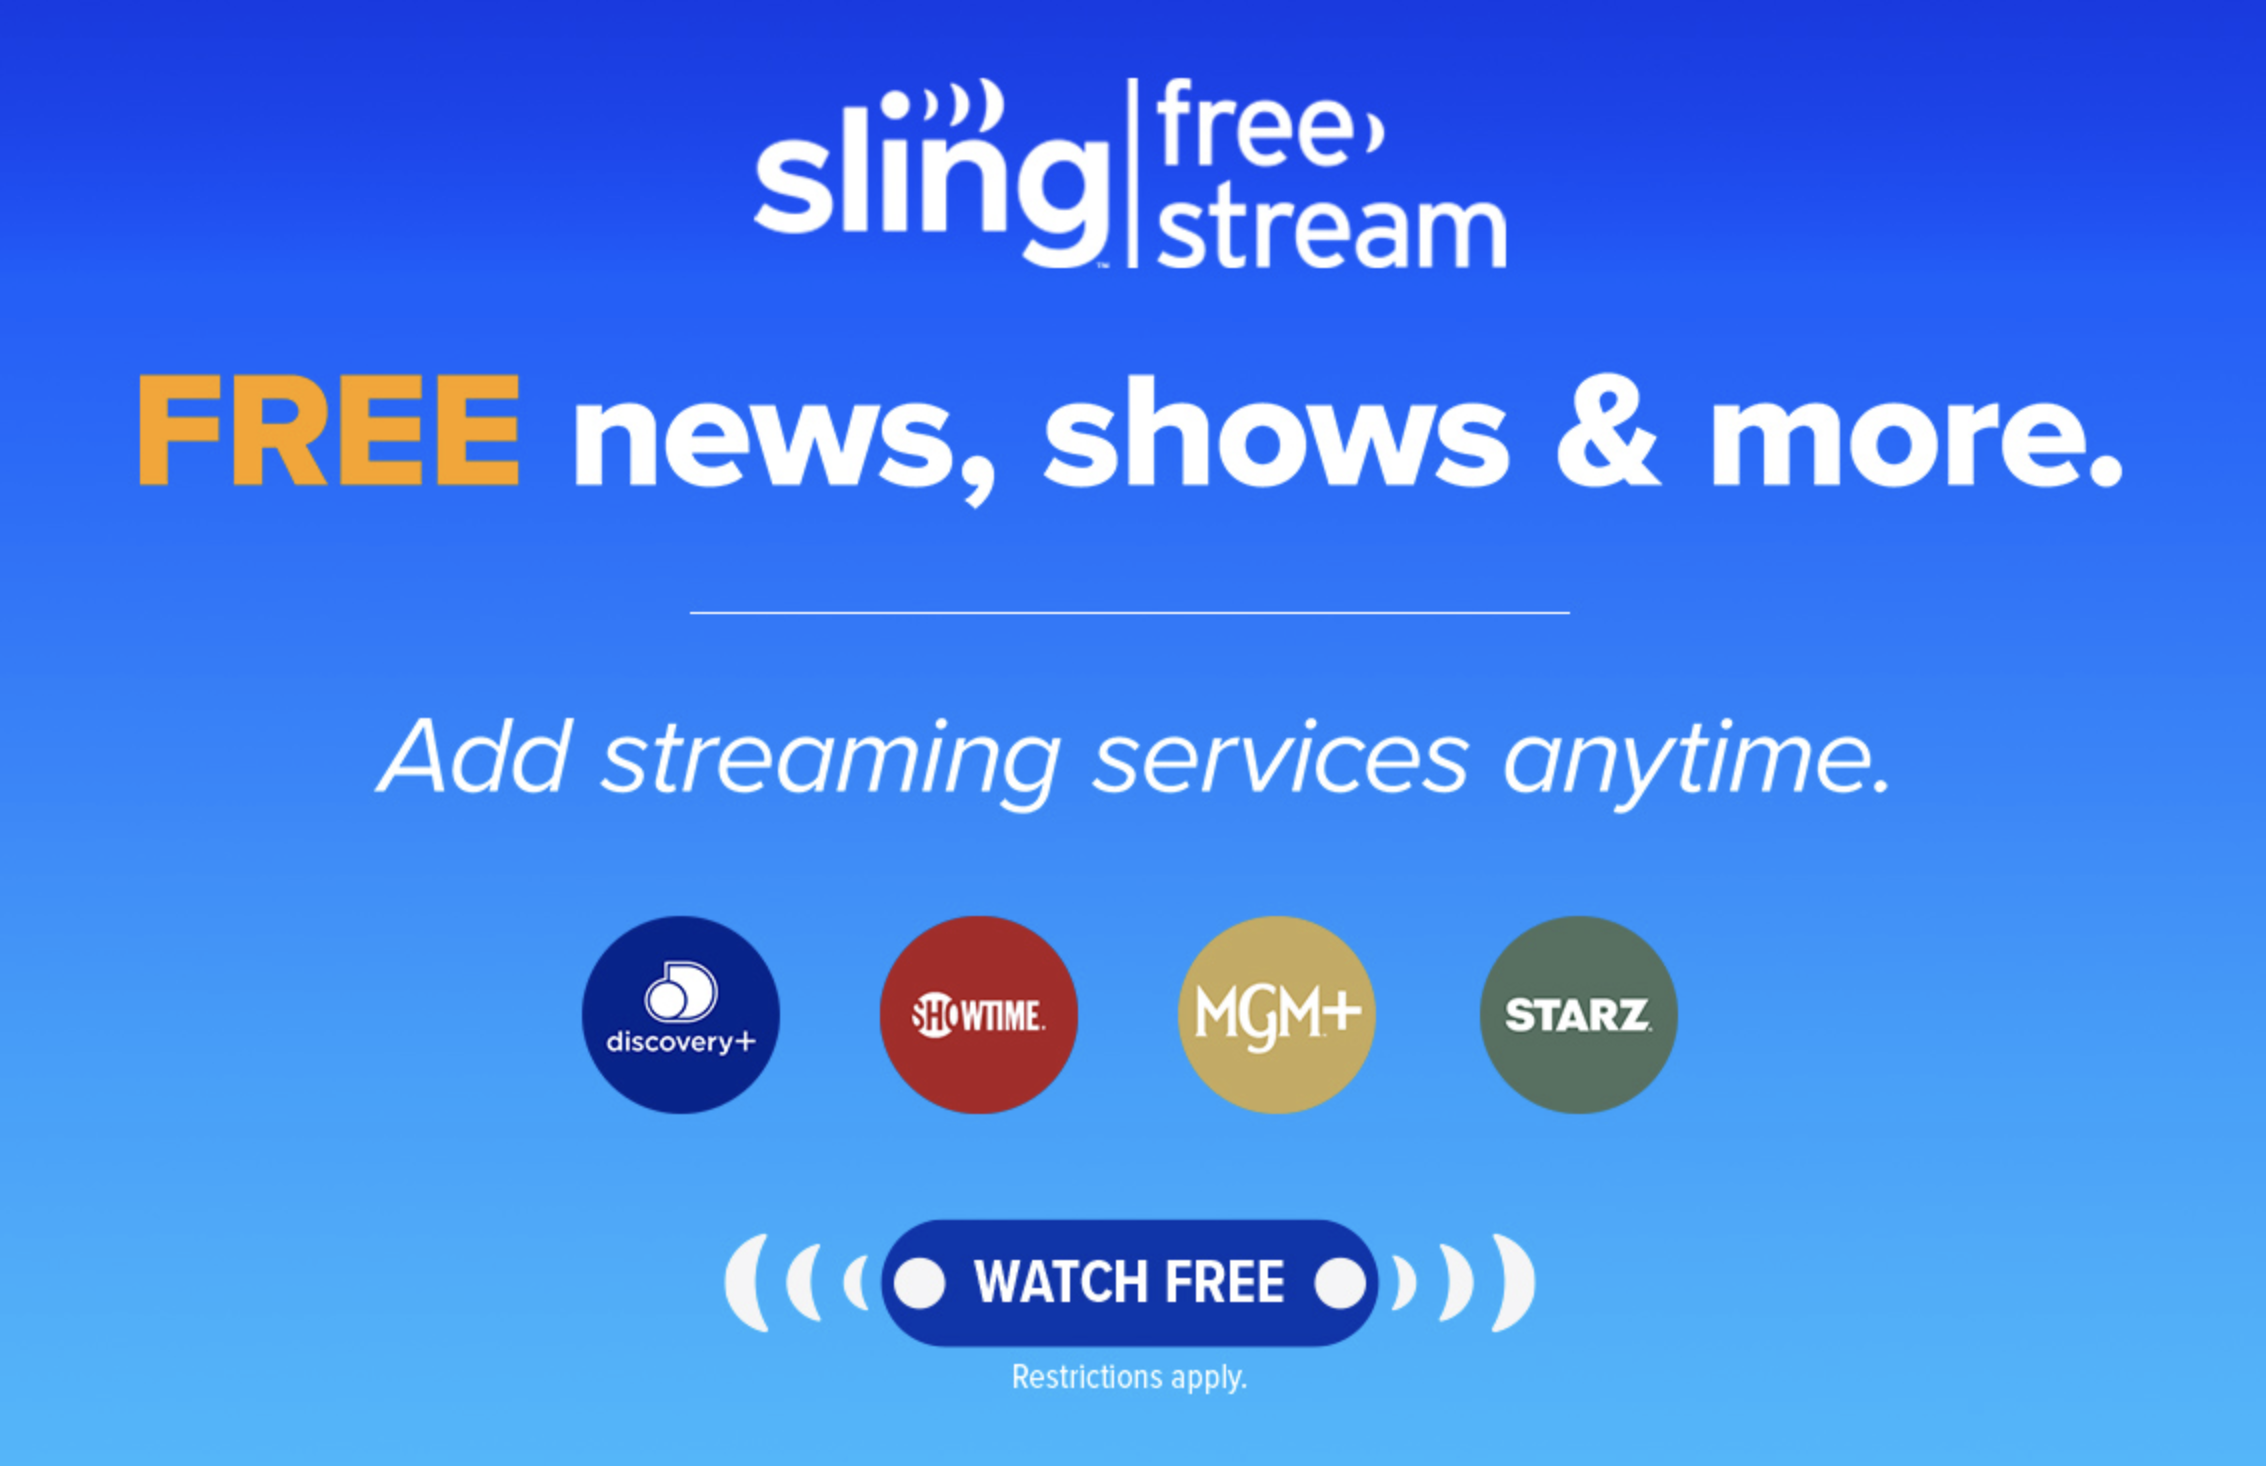 Sling TV Freestream: Sign up for FREE streaming of 400+ live channels!